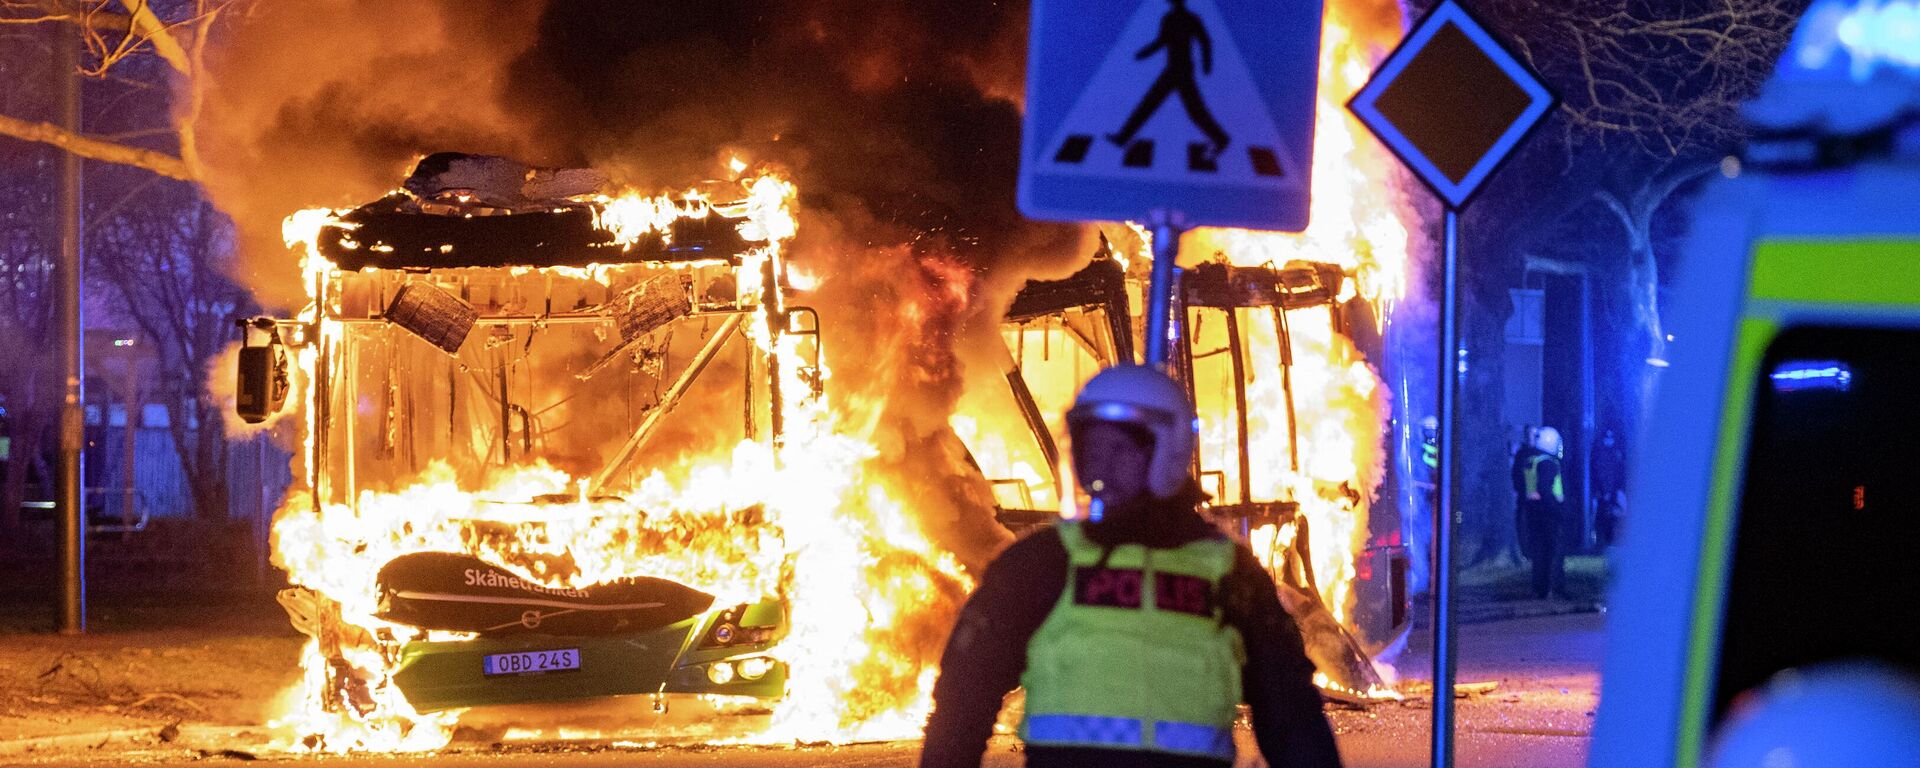 An anti-riot police officer stands next to a city bus burning in Malmo late April 16, 2022. - The unrest in Malmo has continued after Rasmus Paludan, party leader of the Danish right-wing extremist party Tight Course, held a demonstration on April 16, 2022 at Skanegarden near the Oresund Bridge. (Photo by Johan NILSSON / TT NEWS AGENCY / AFP)  - Sputnik International, 1920, 02.05.2022